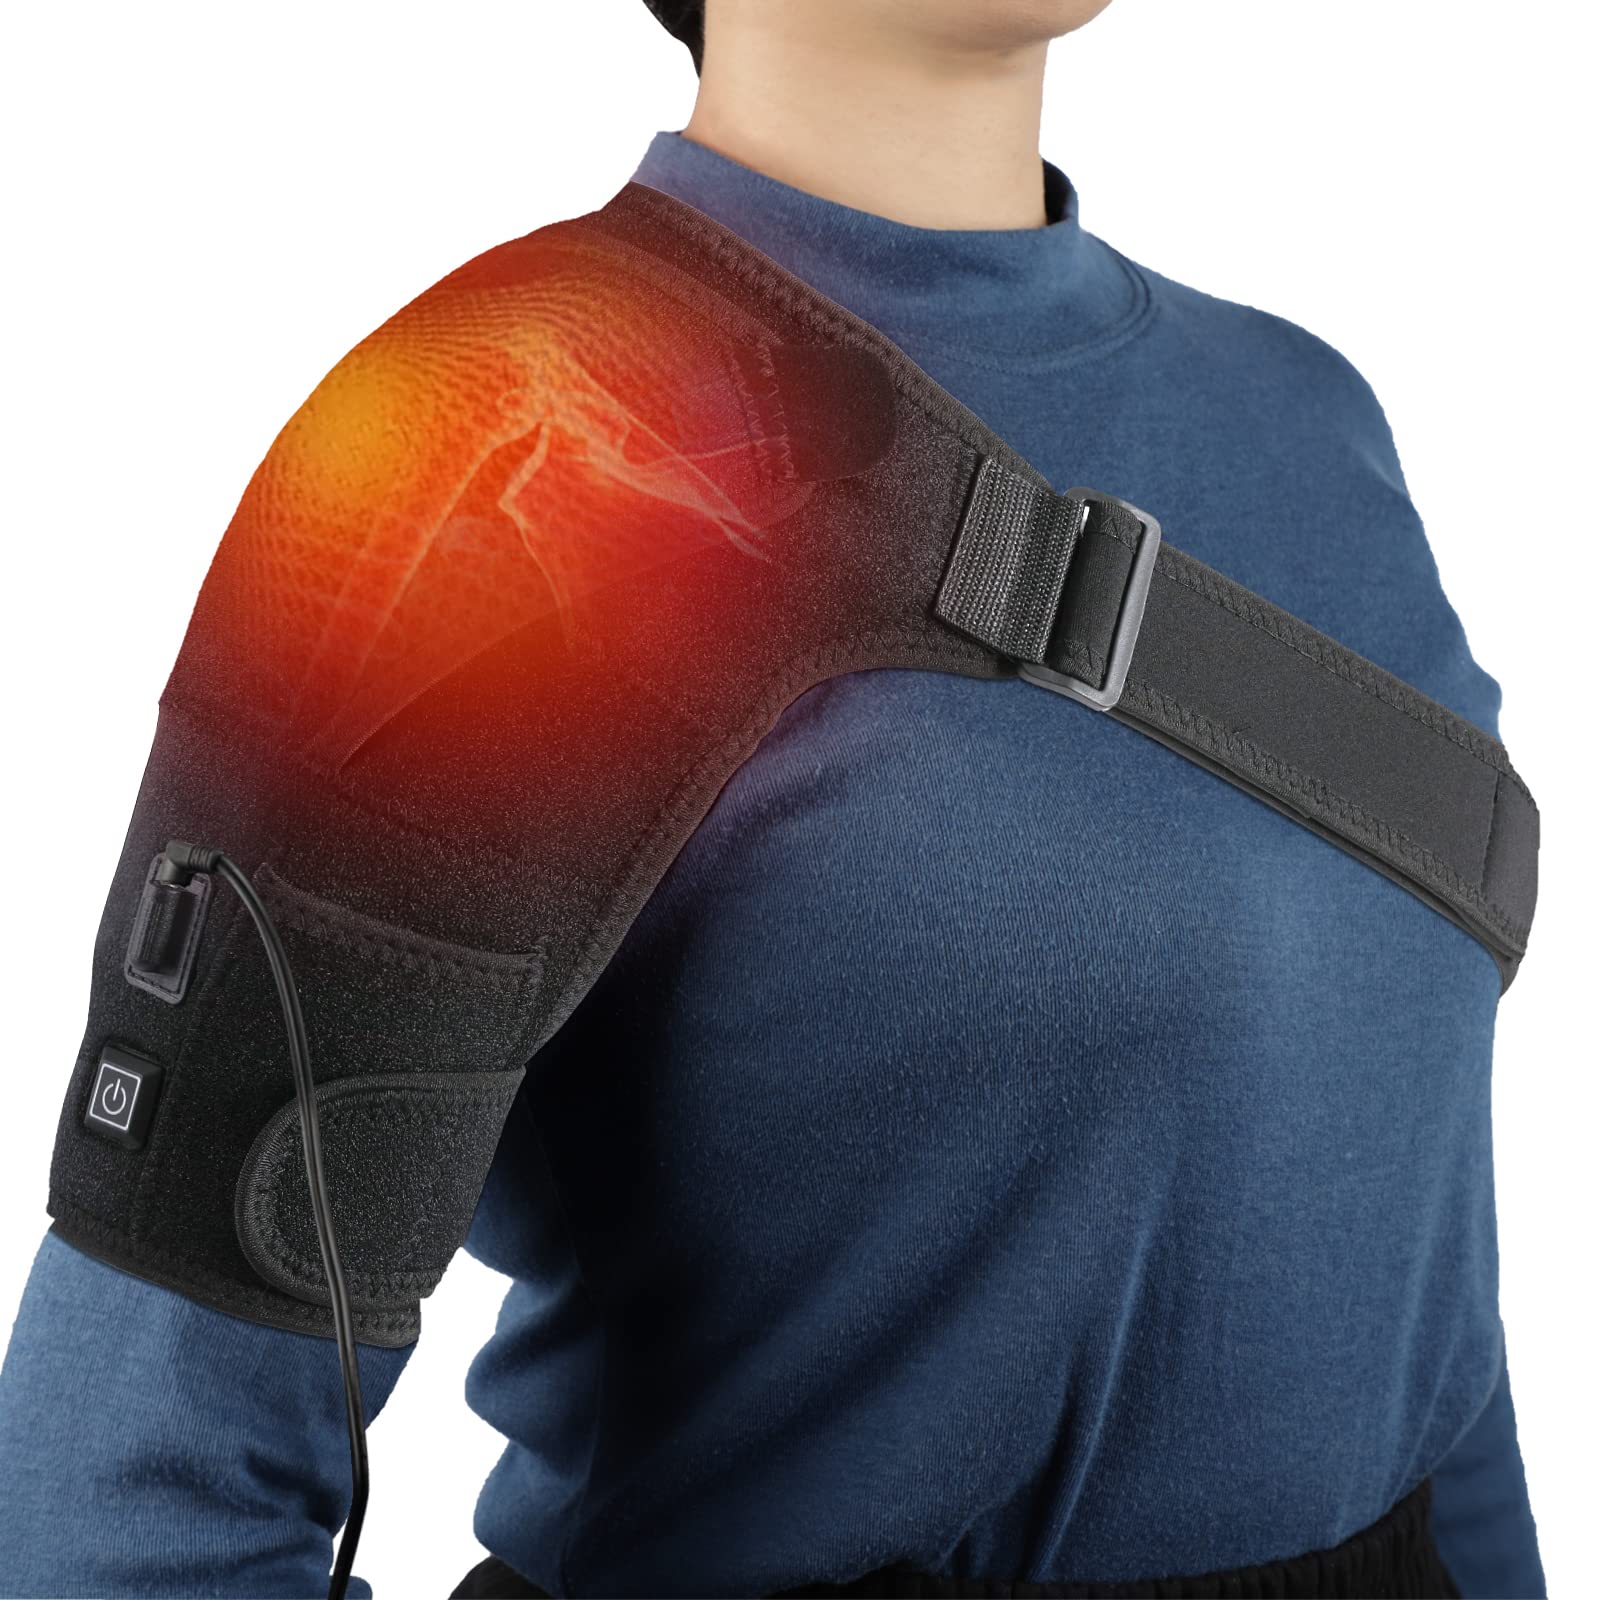 Single Shoulder Support Wrap Adjustable Compression Brace Sleeve Pad  Fitness Sportswear Accessories